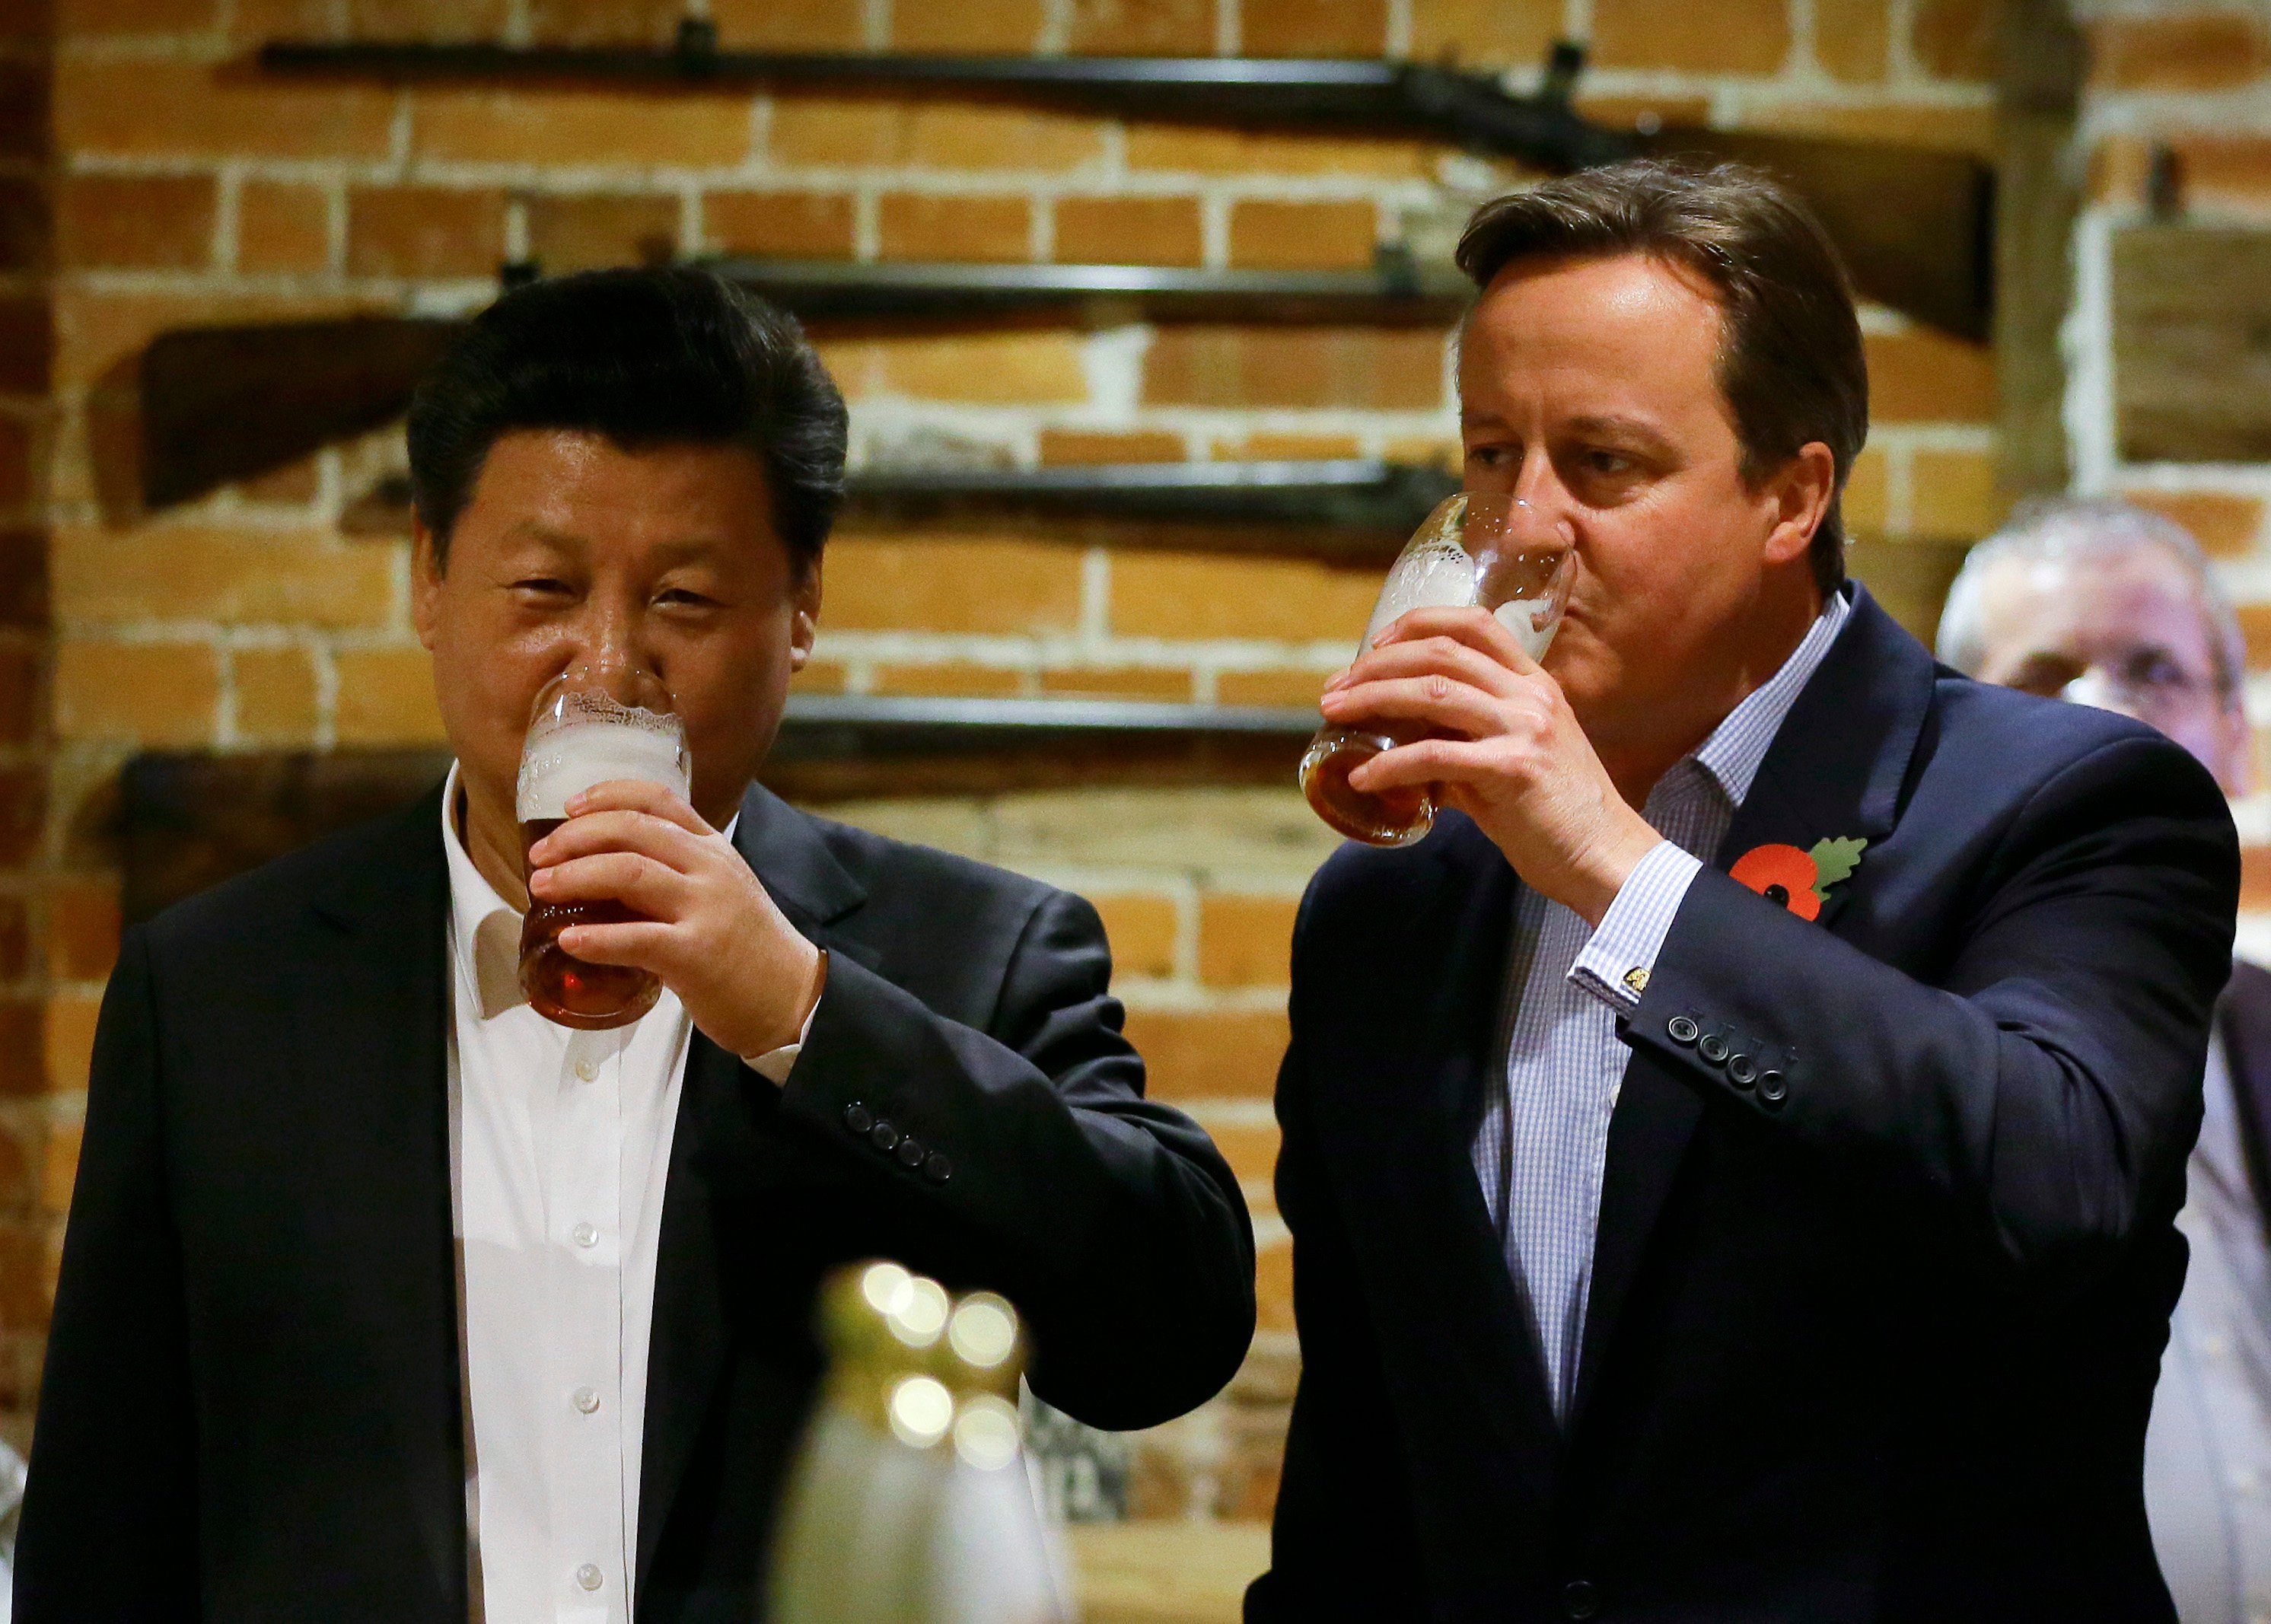 On October 22, 2015  then British PM David Cameron, right,  drinks a pint of beer with Chinese President Xi Jinping at the Plough pub in Princess Risborough near Chequers. Photo: AFP